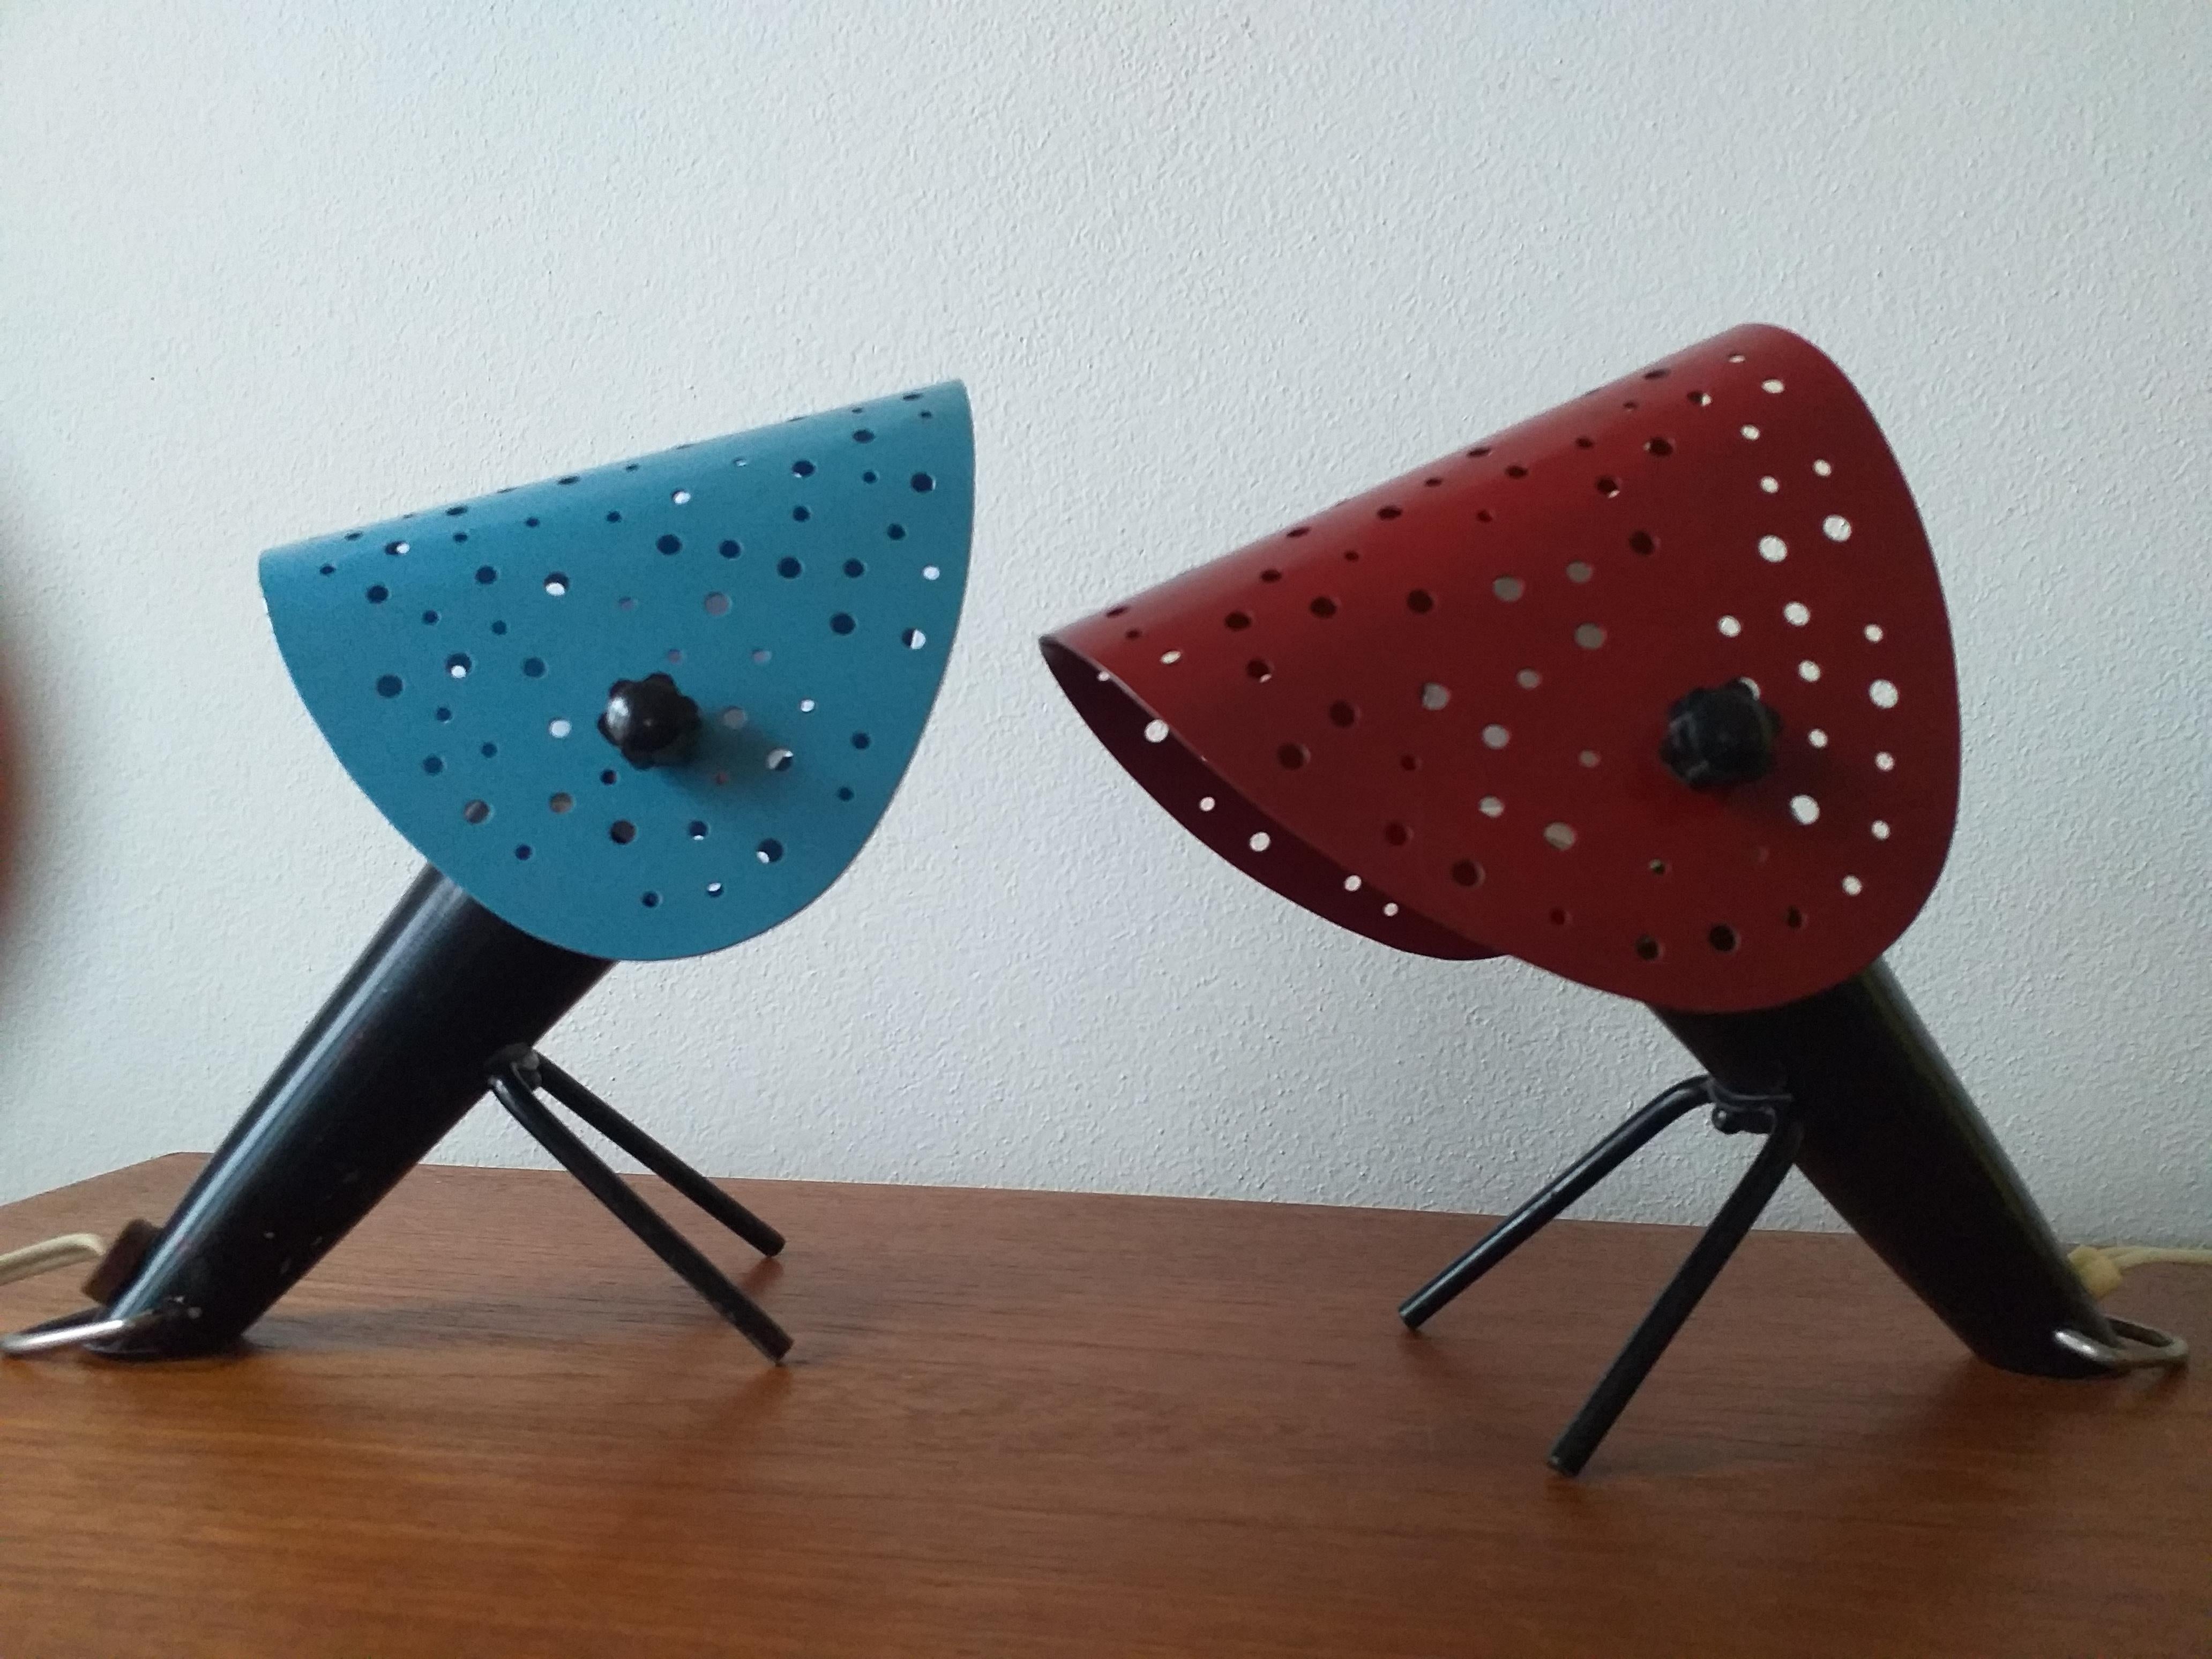 Mid-Century Modern Pair of Midcentury Table Lamps by Ernst Igl for Hillebrand, 1950s For Sale